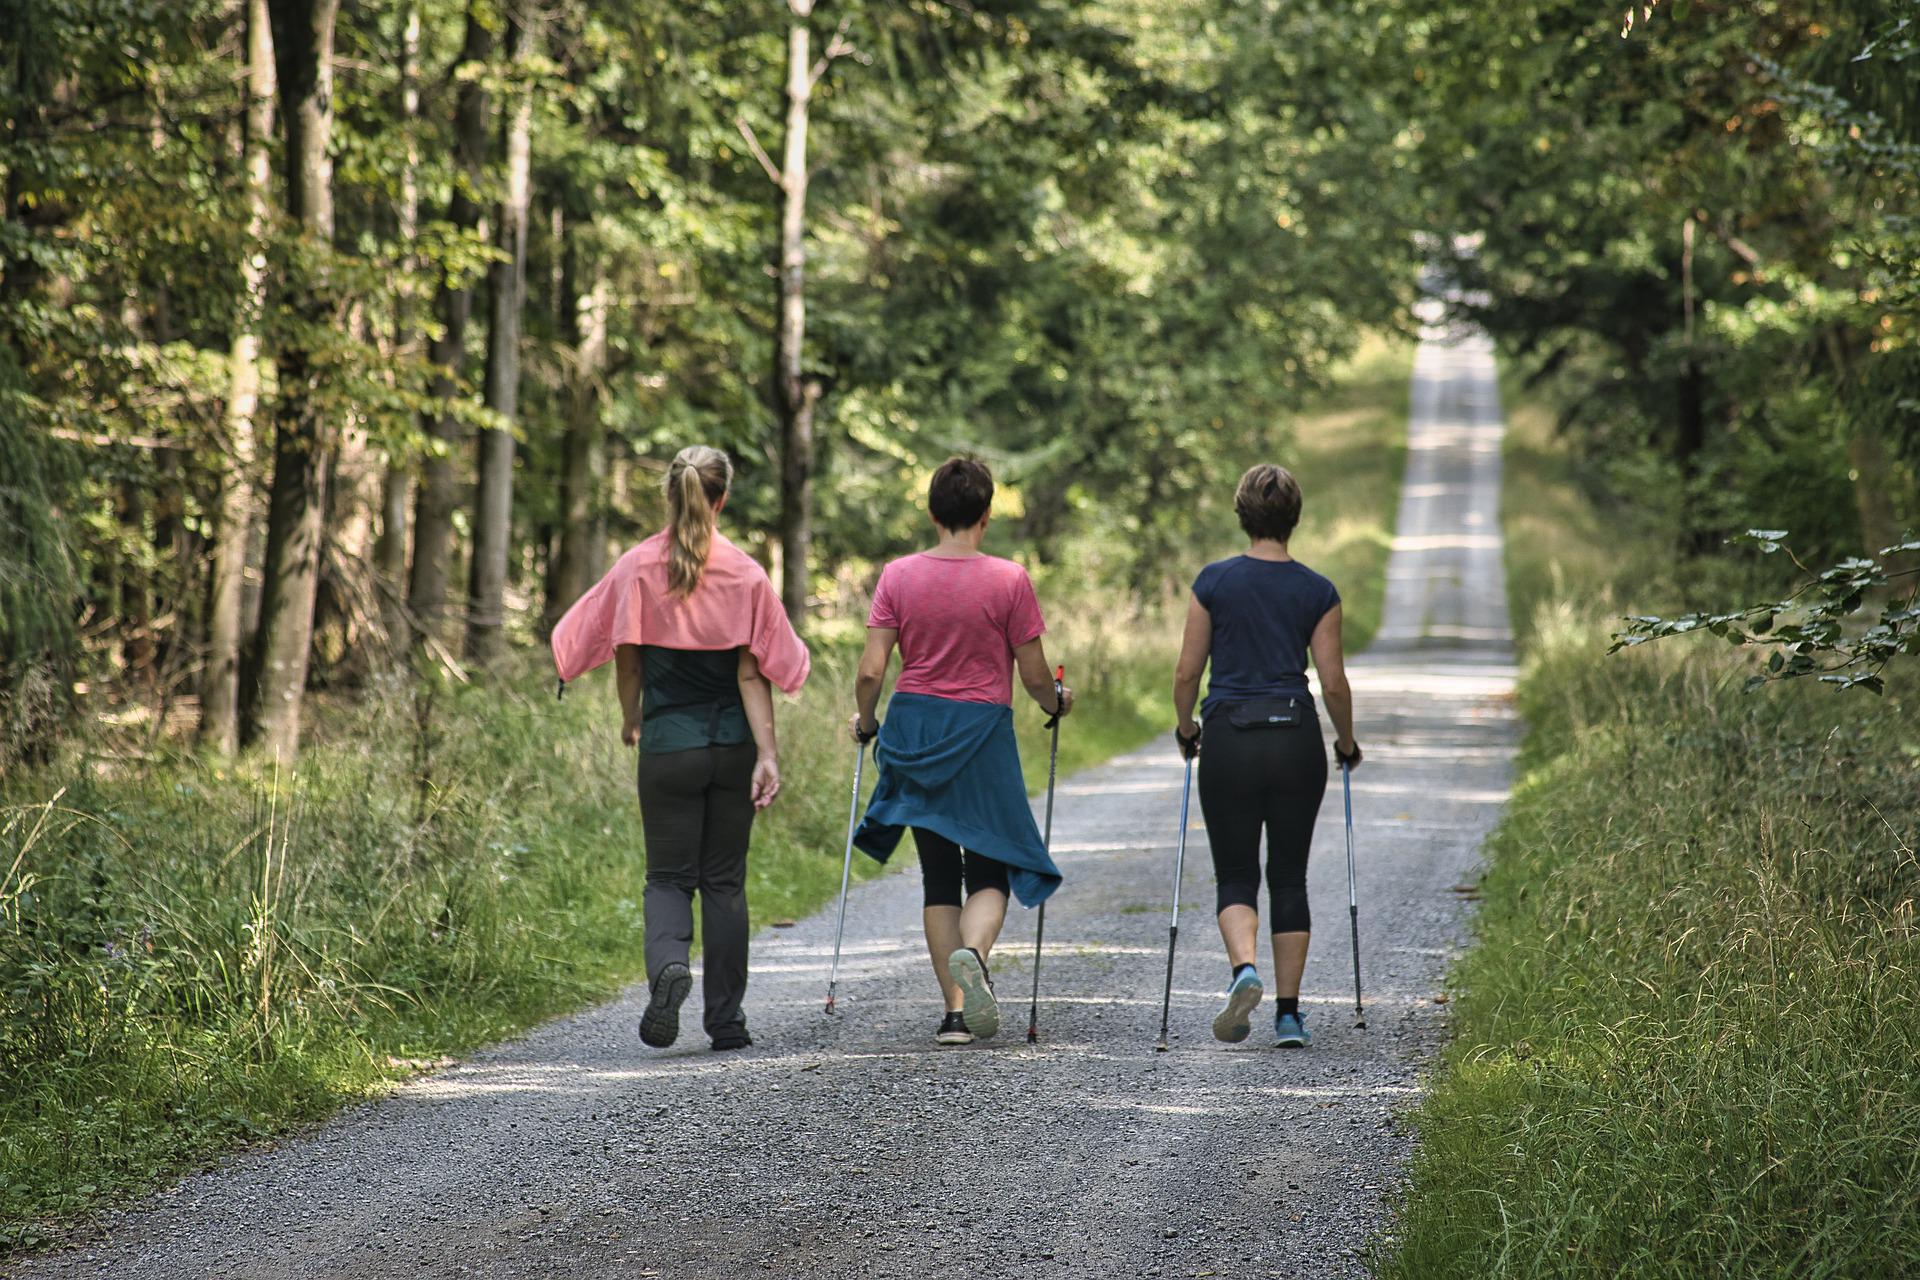 Does Walking Increase Longevity And Quality Of Life?